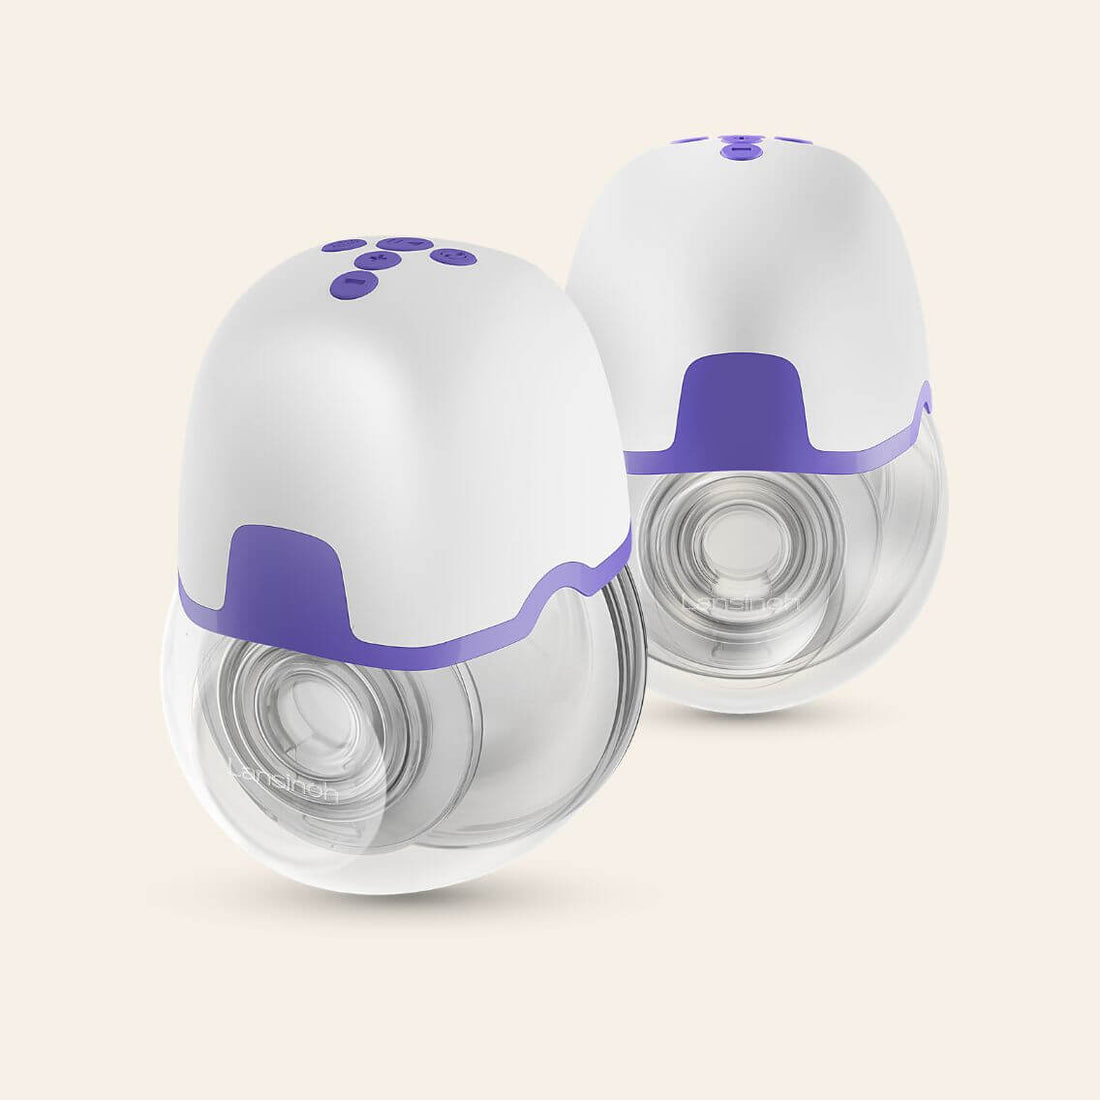 The Best Wearable Breast Pumps, Tested by Parents